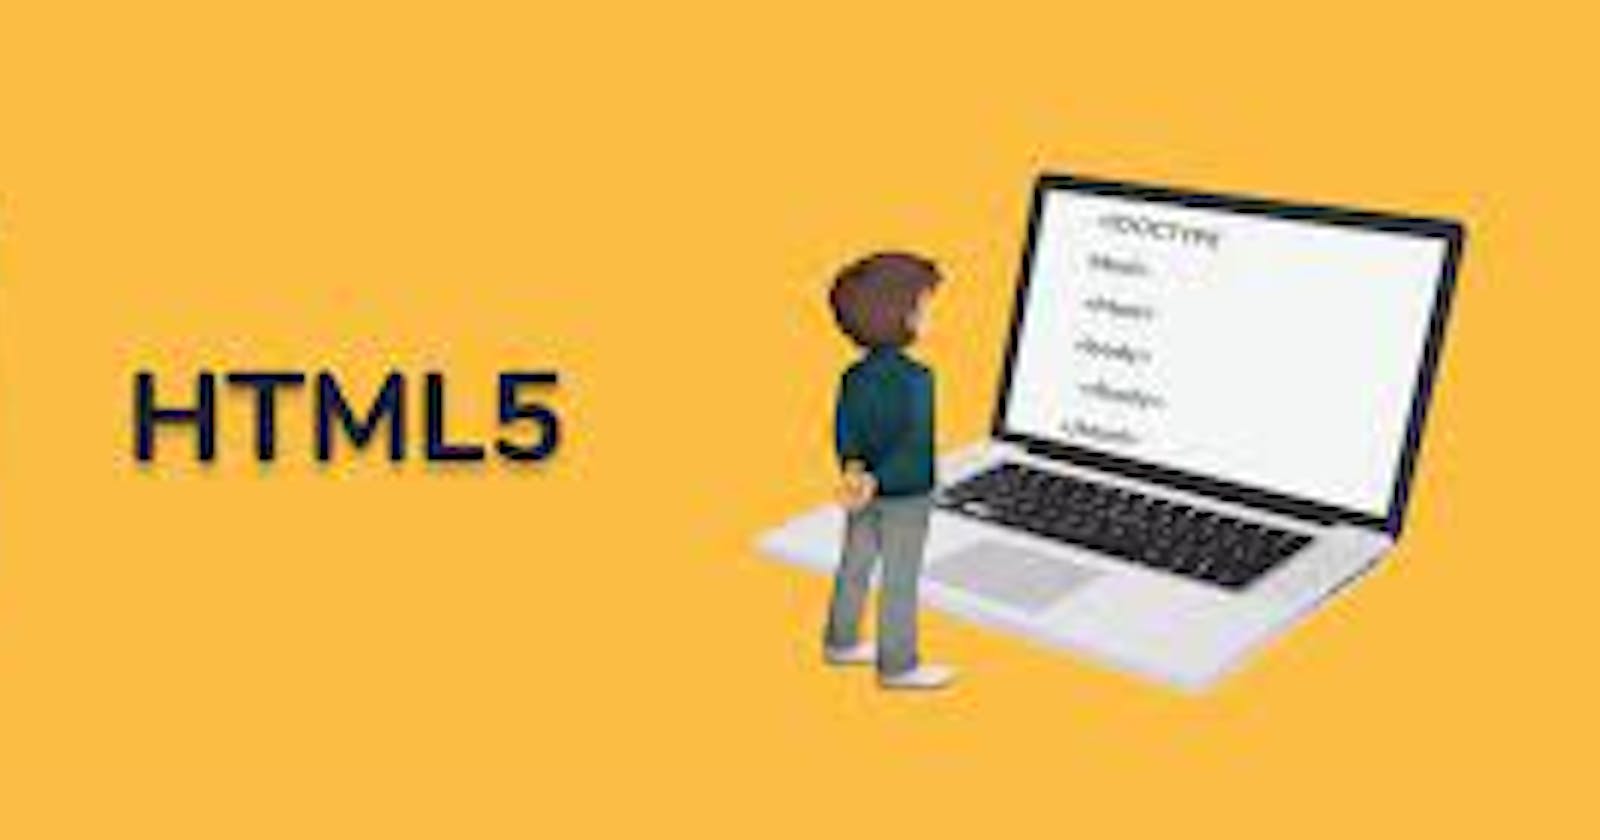 Html basics course easy to learn